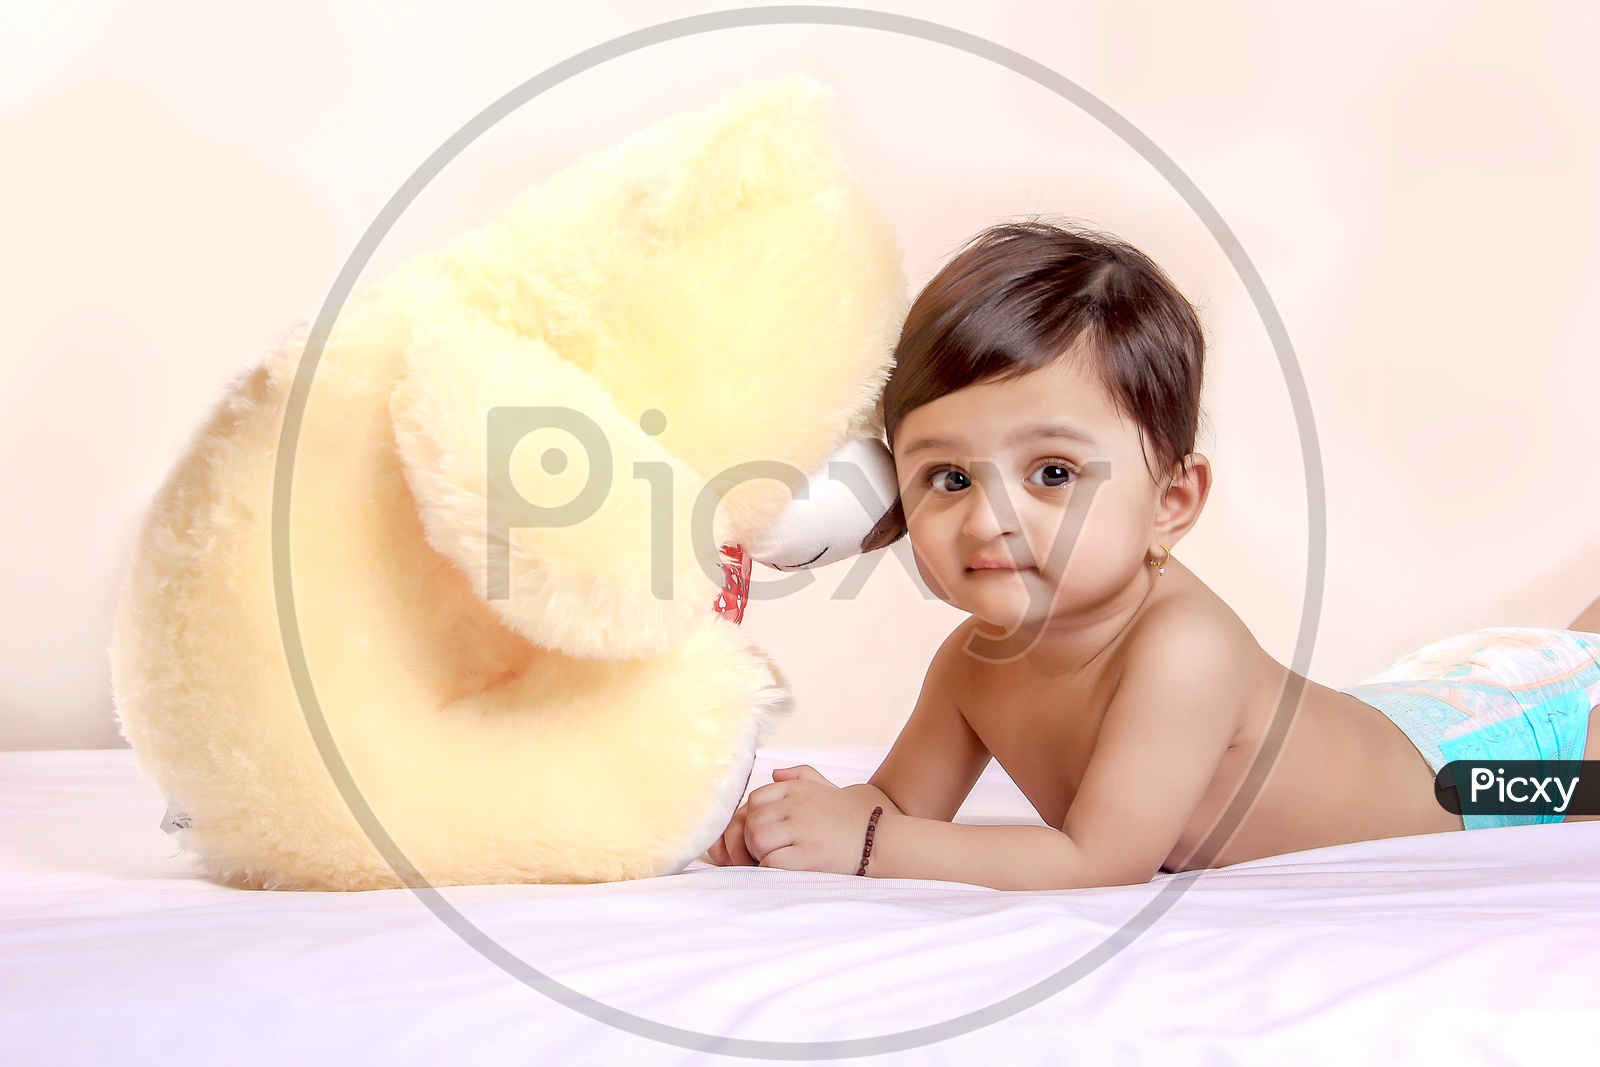 Cute Indian Baby Child Playing With Toys Or Dolls